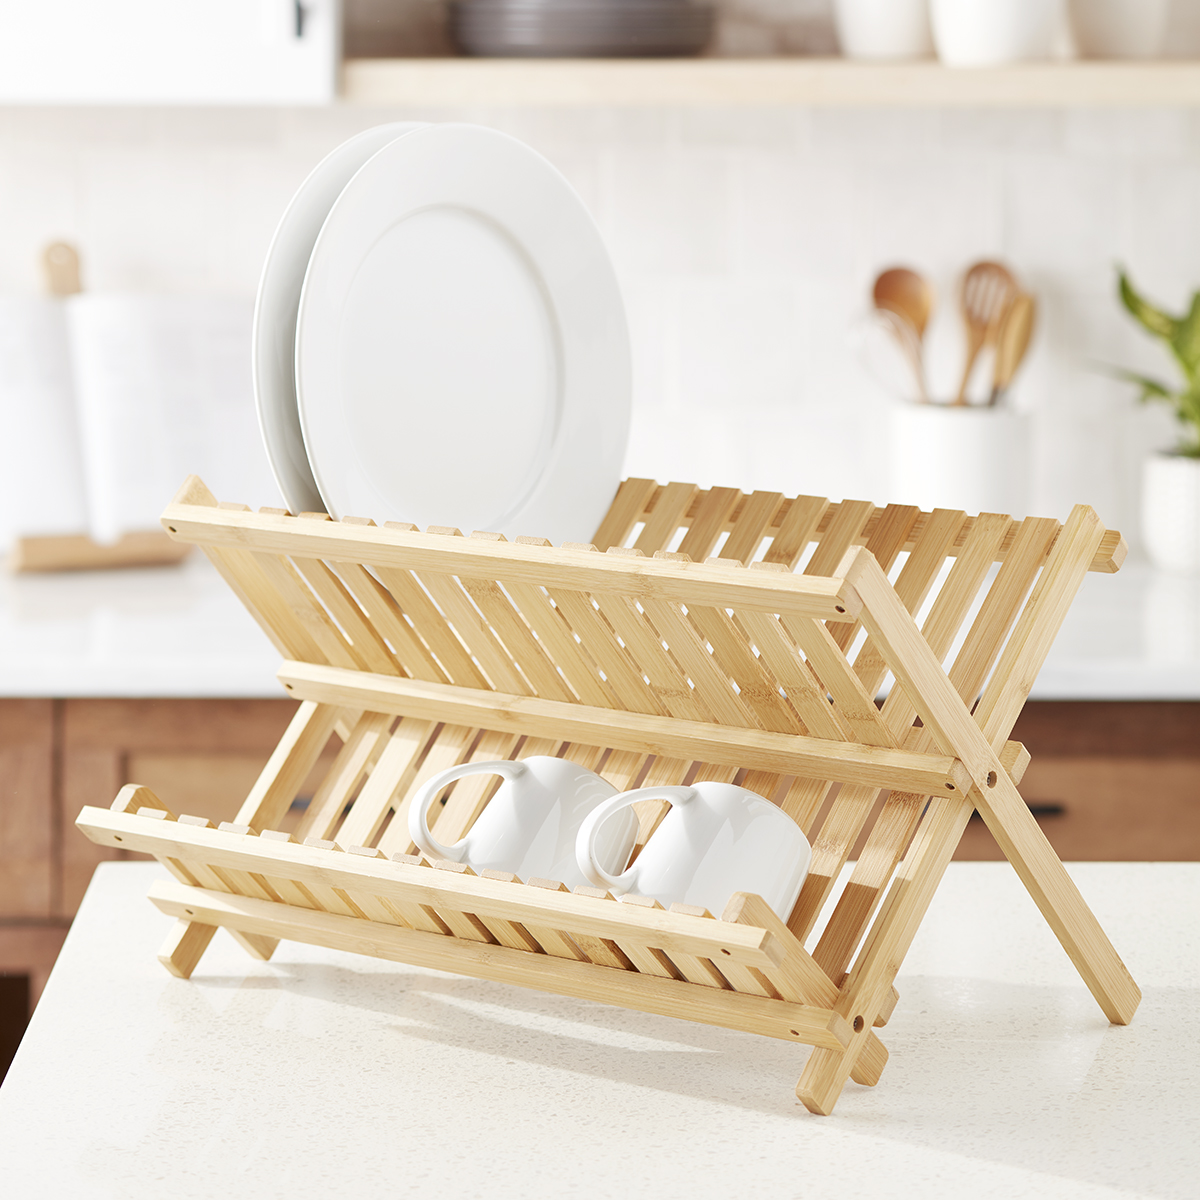 https://www.containerstore.com/catalogimages/411210/SUS_21_-bamboo-dish-rack.jpg